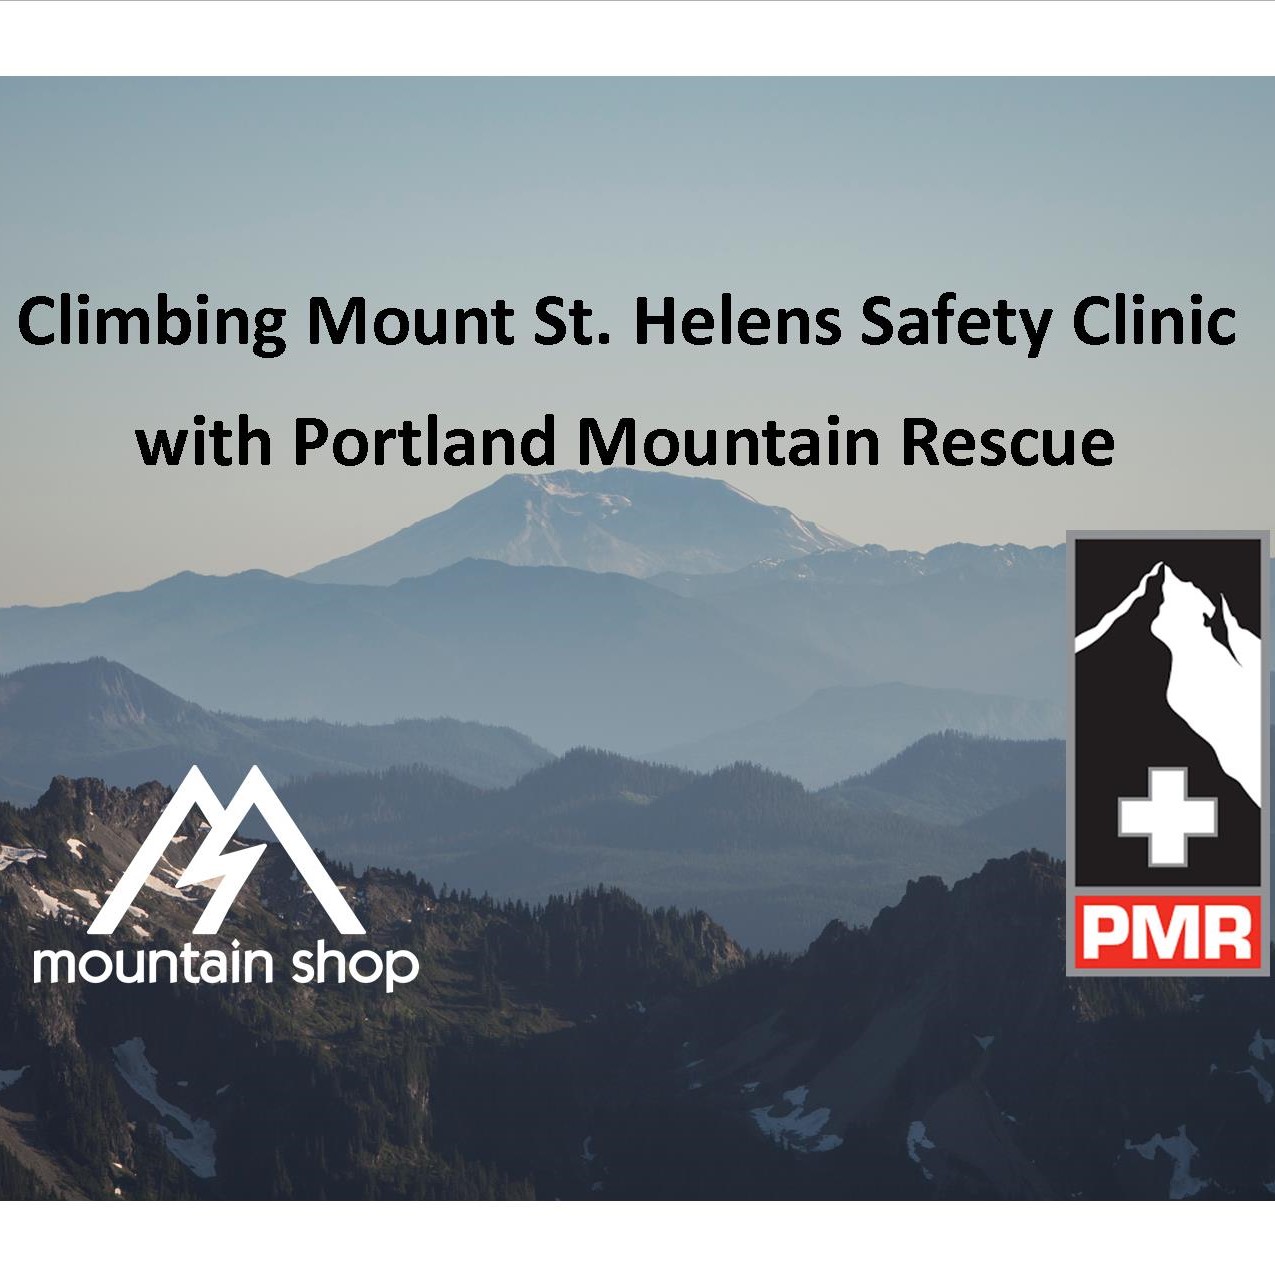 Climbing Mount Saint Helens with PMR